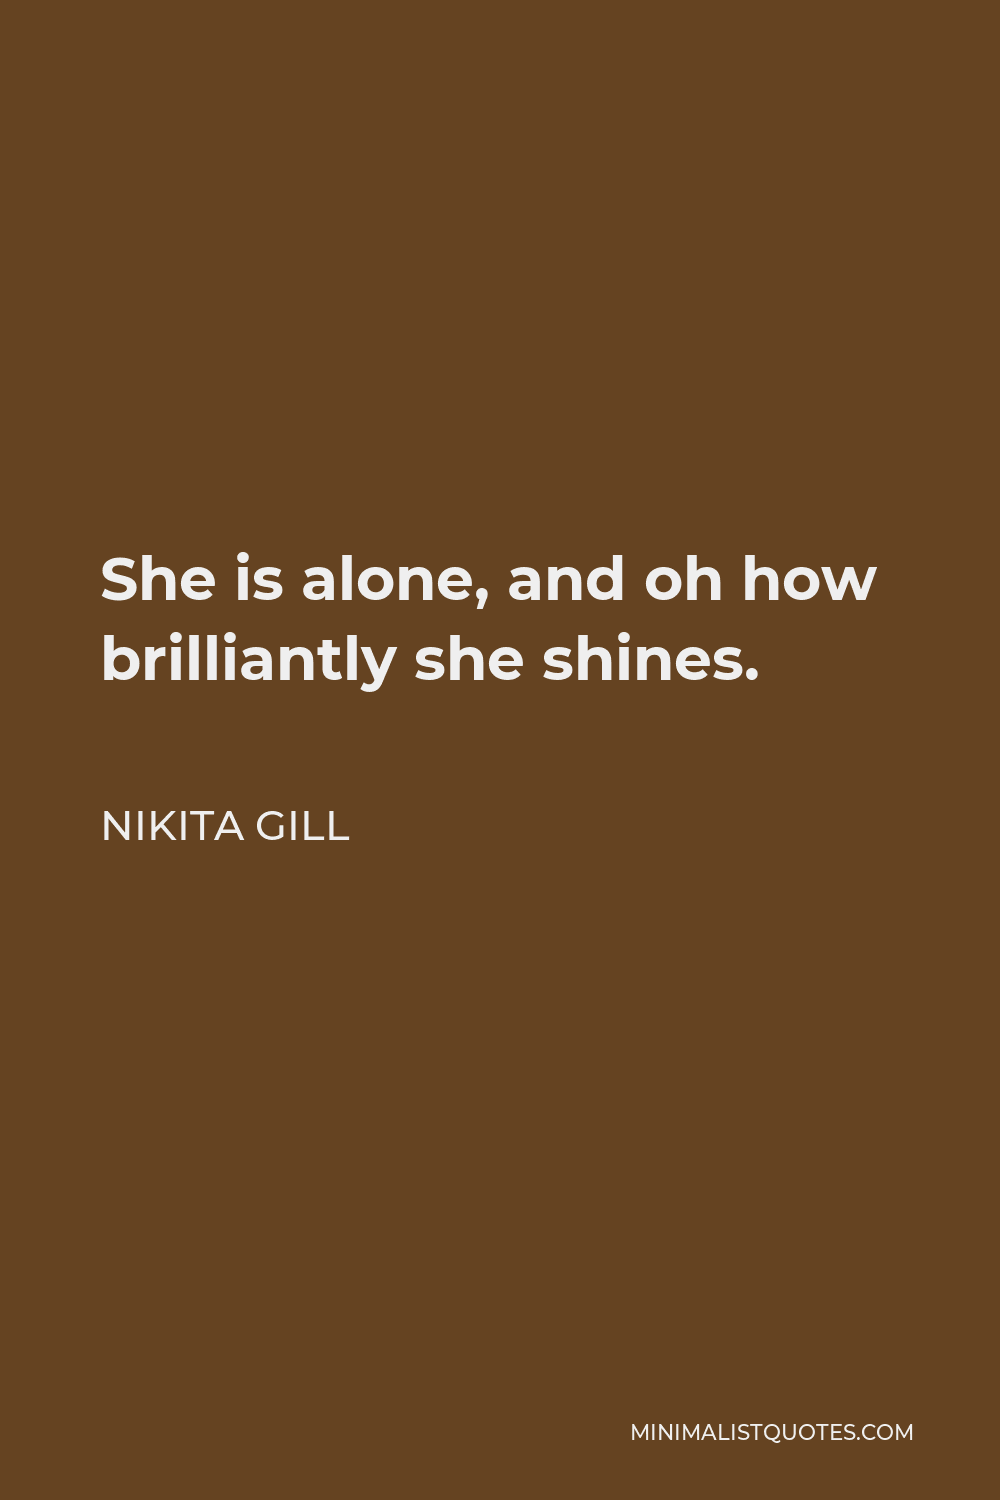 Nikita Gill Quote - She is alone, and oh how brilliantly she shines.